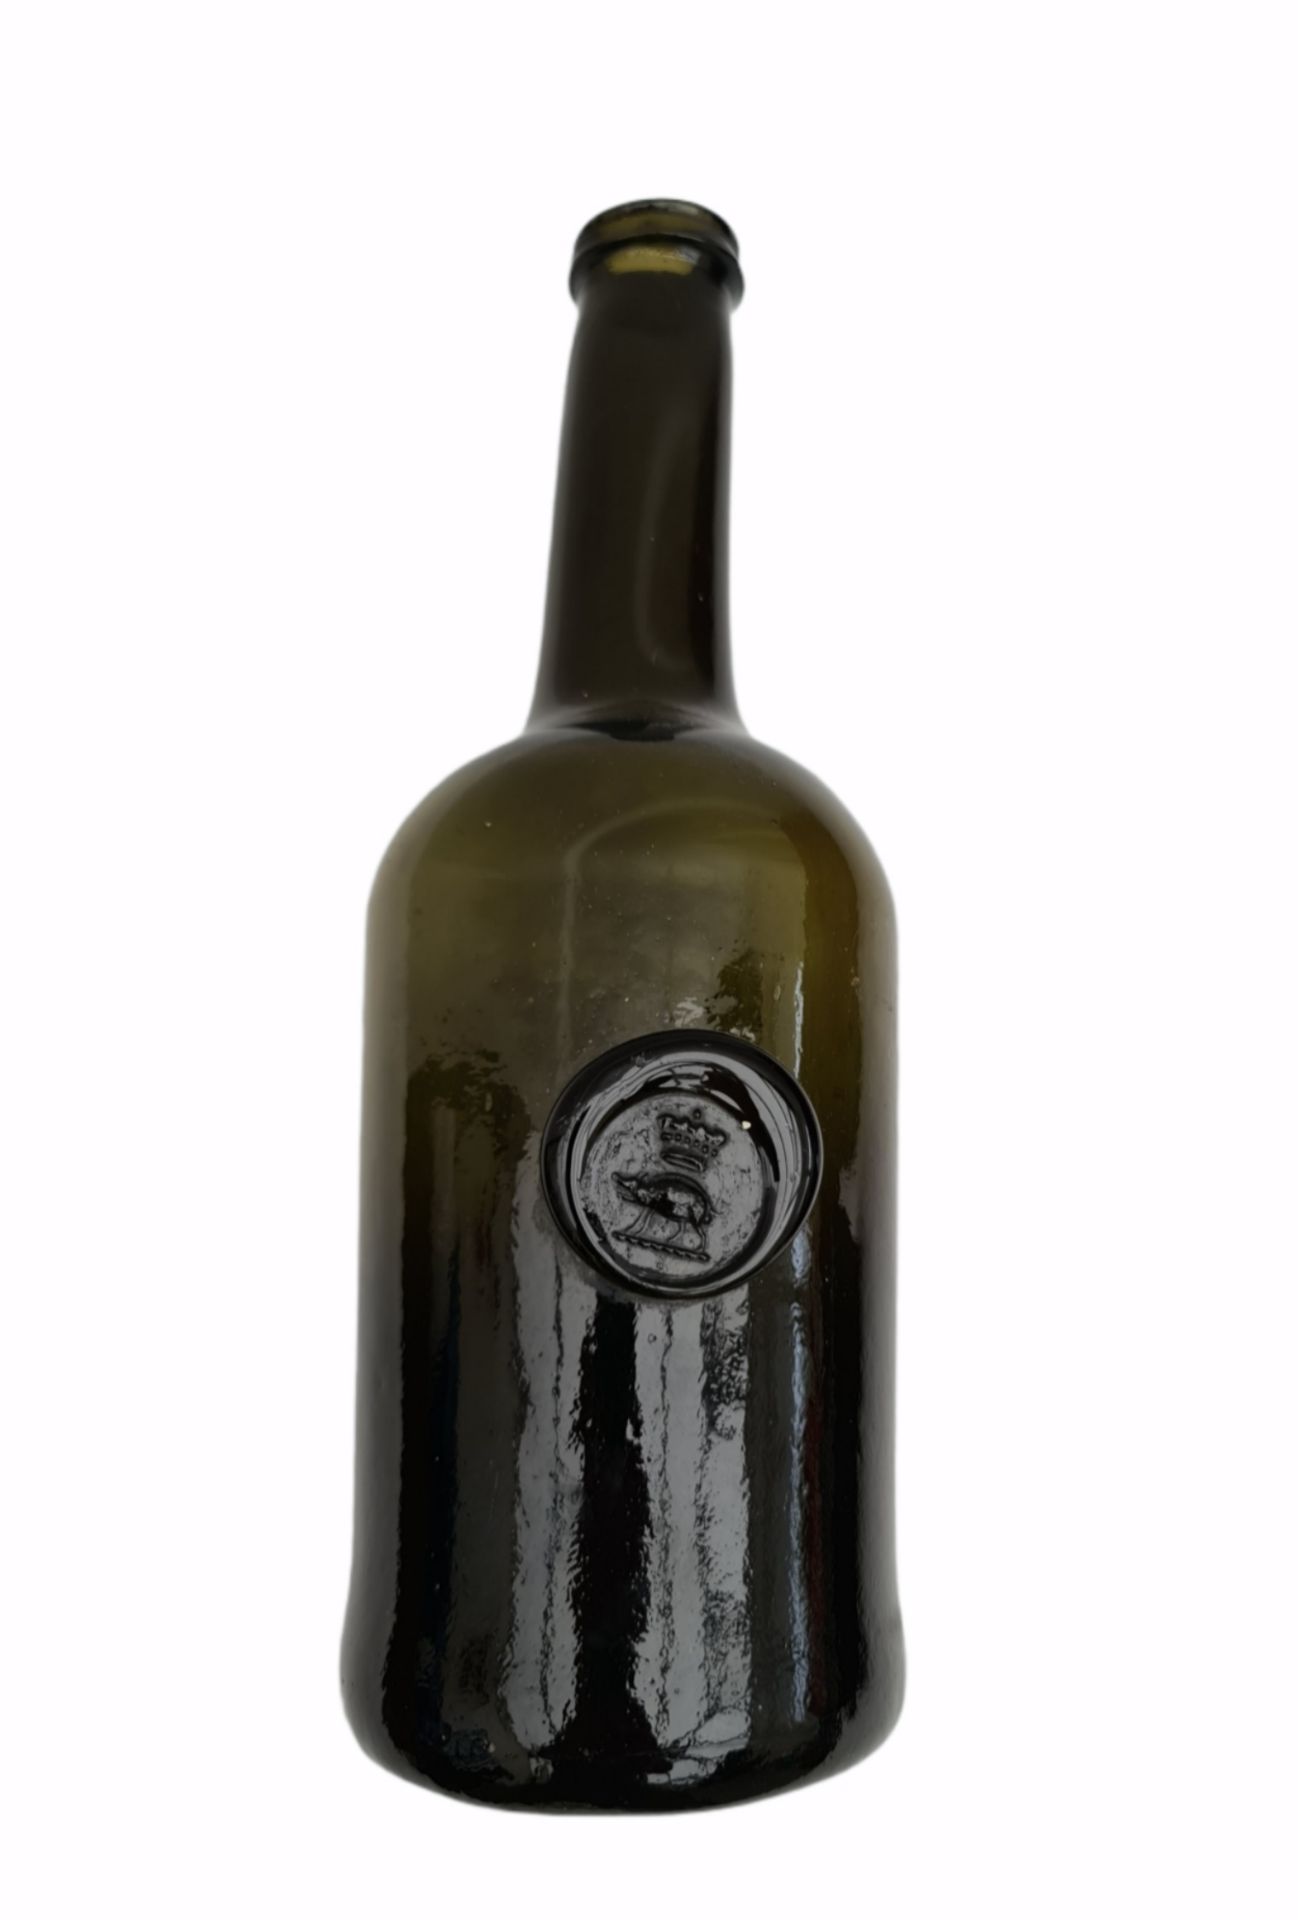 Antique Wine Bottle c1790's Edgecumbe Family Seal. From a private collection - Image 2 of 3